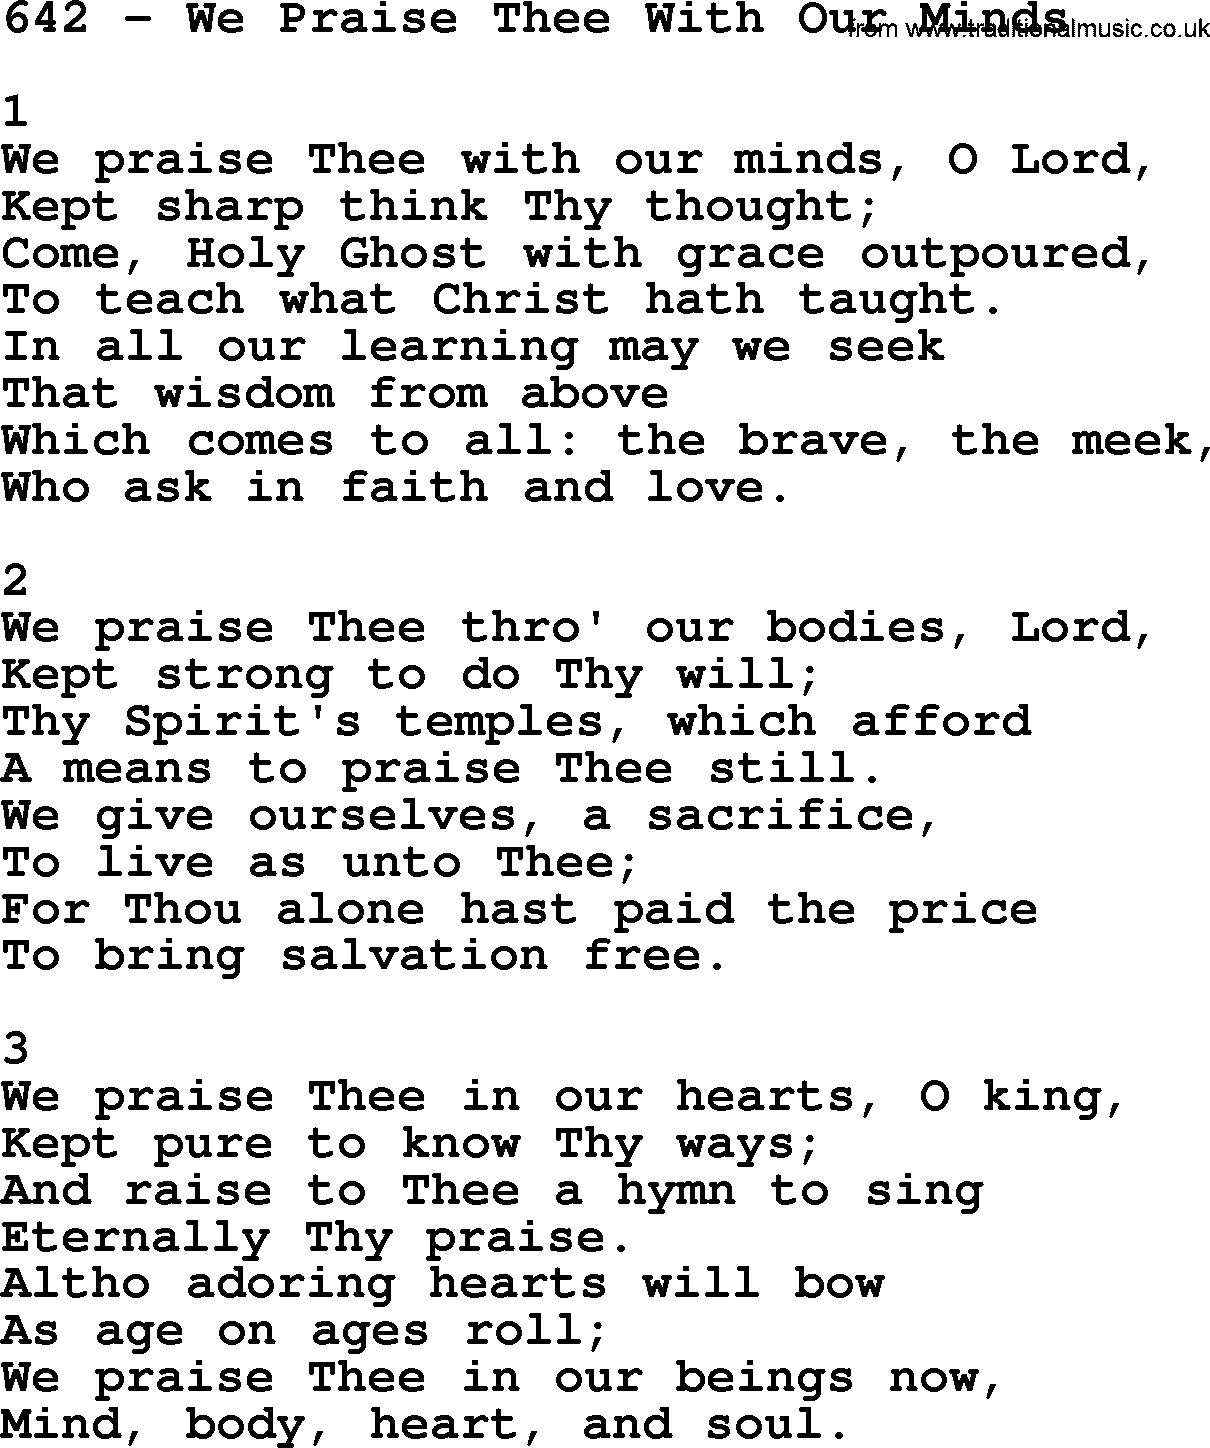 Complete Adventis Hymnal, title: 642-We Praise Thee With Our Minds, with lyrics, midi, mp3, powerpoints(PPT) and PDF,